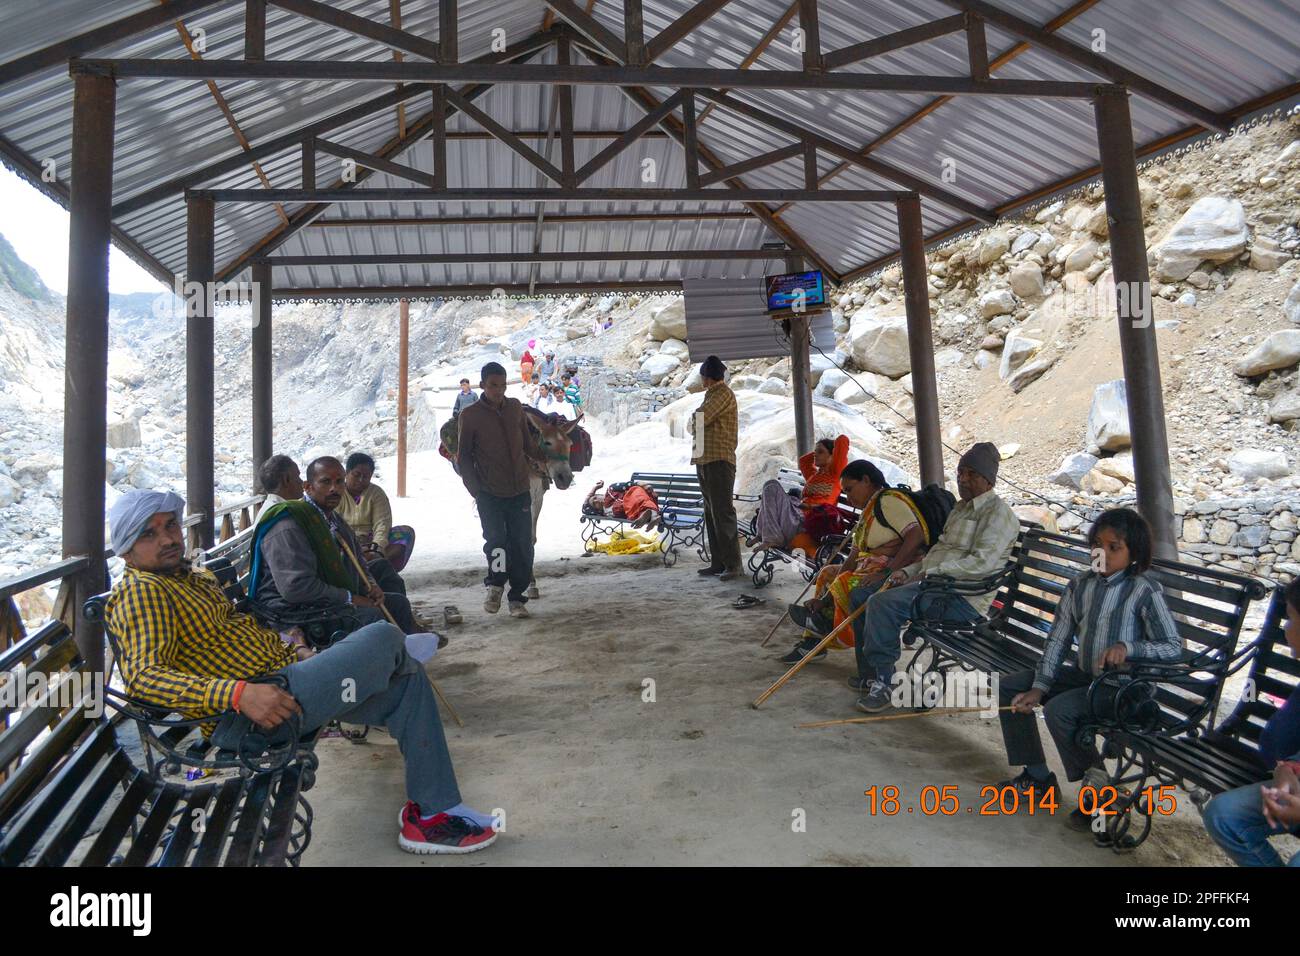 Rudarprayag, Uttarakhand, India, May 18 2014, Pilgrims resting in shed on the way to Kedarnath temple. Government made many shed for pilgrims in Kedar Stock Photo